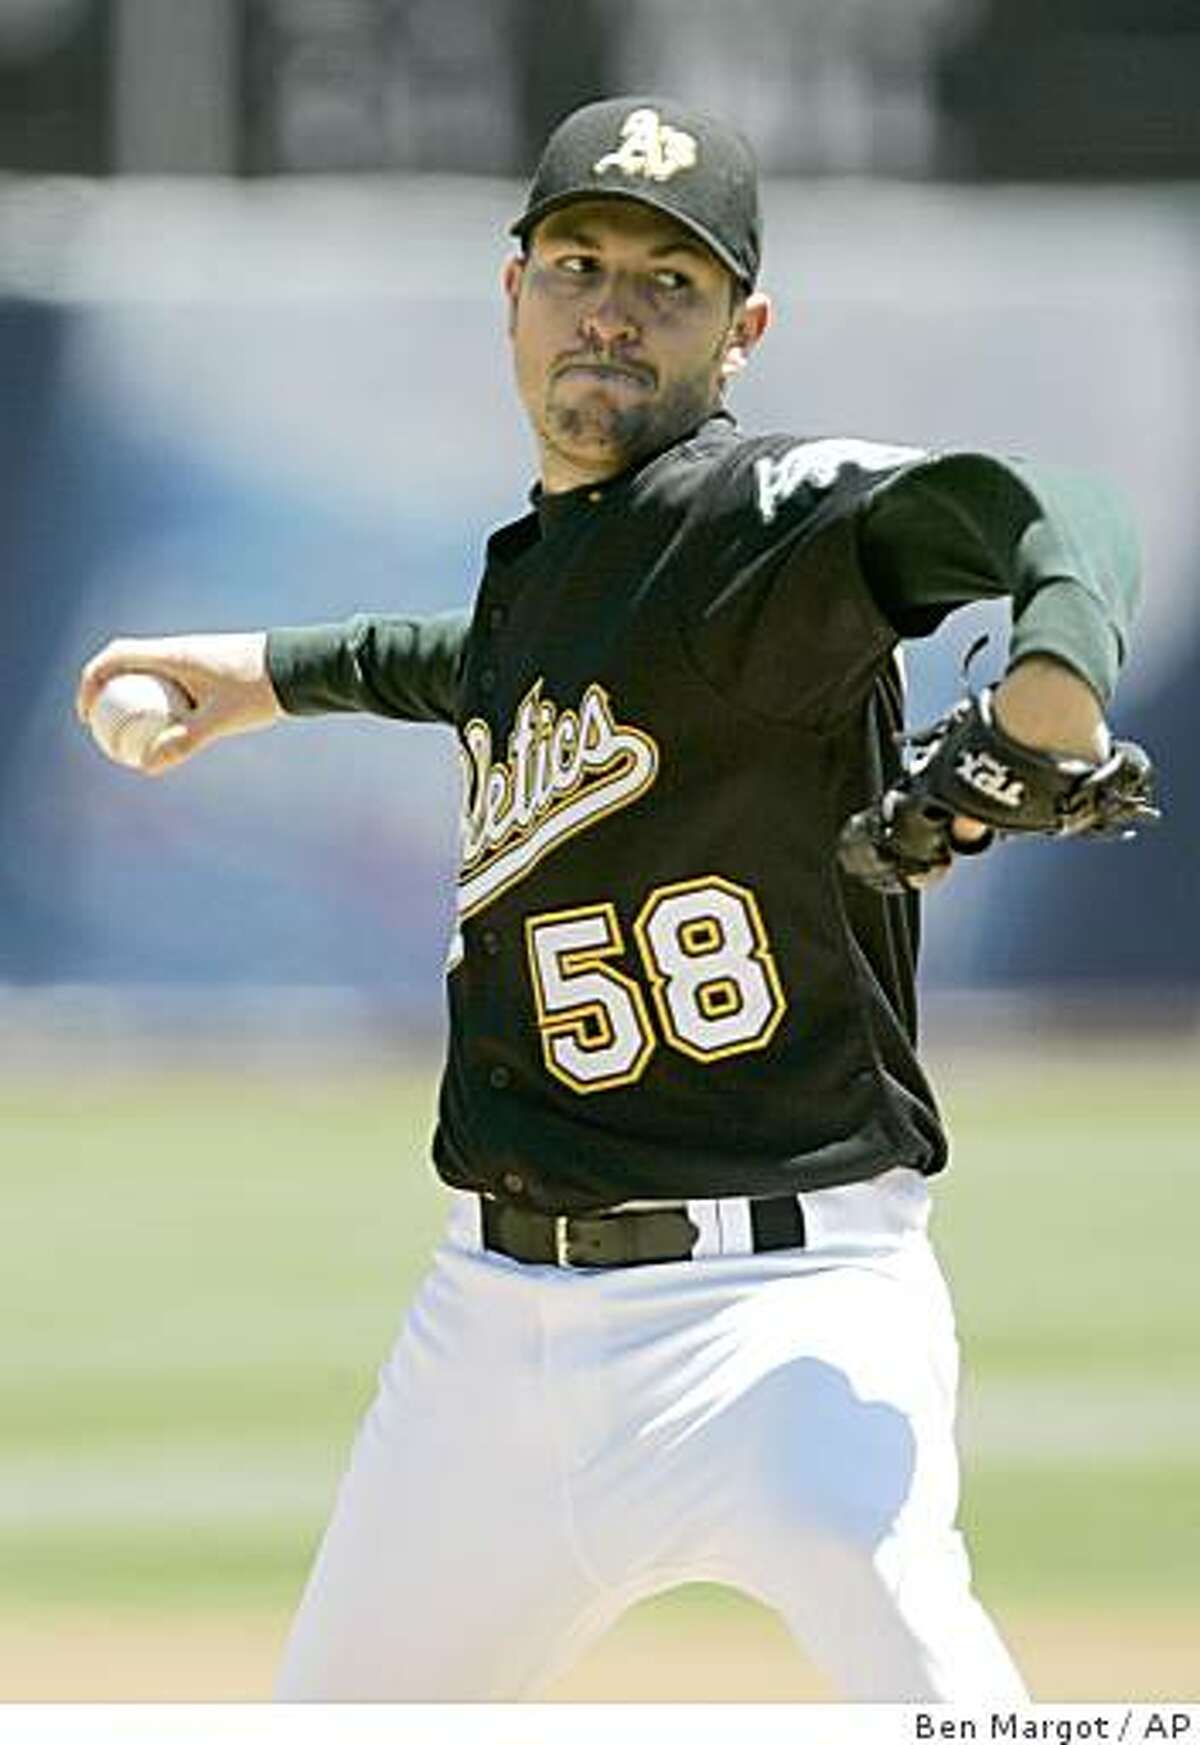 Oakland Athletics' Justin Duchscherer works against the Texas Rangers in the first inning of a baseball game Saturday, July 26, 2008, in Oakland, Calif. (Ben Margot / AP)